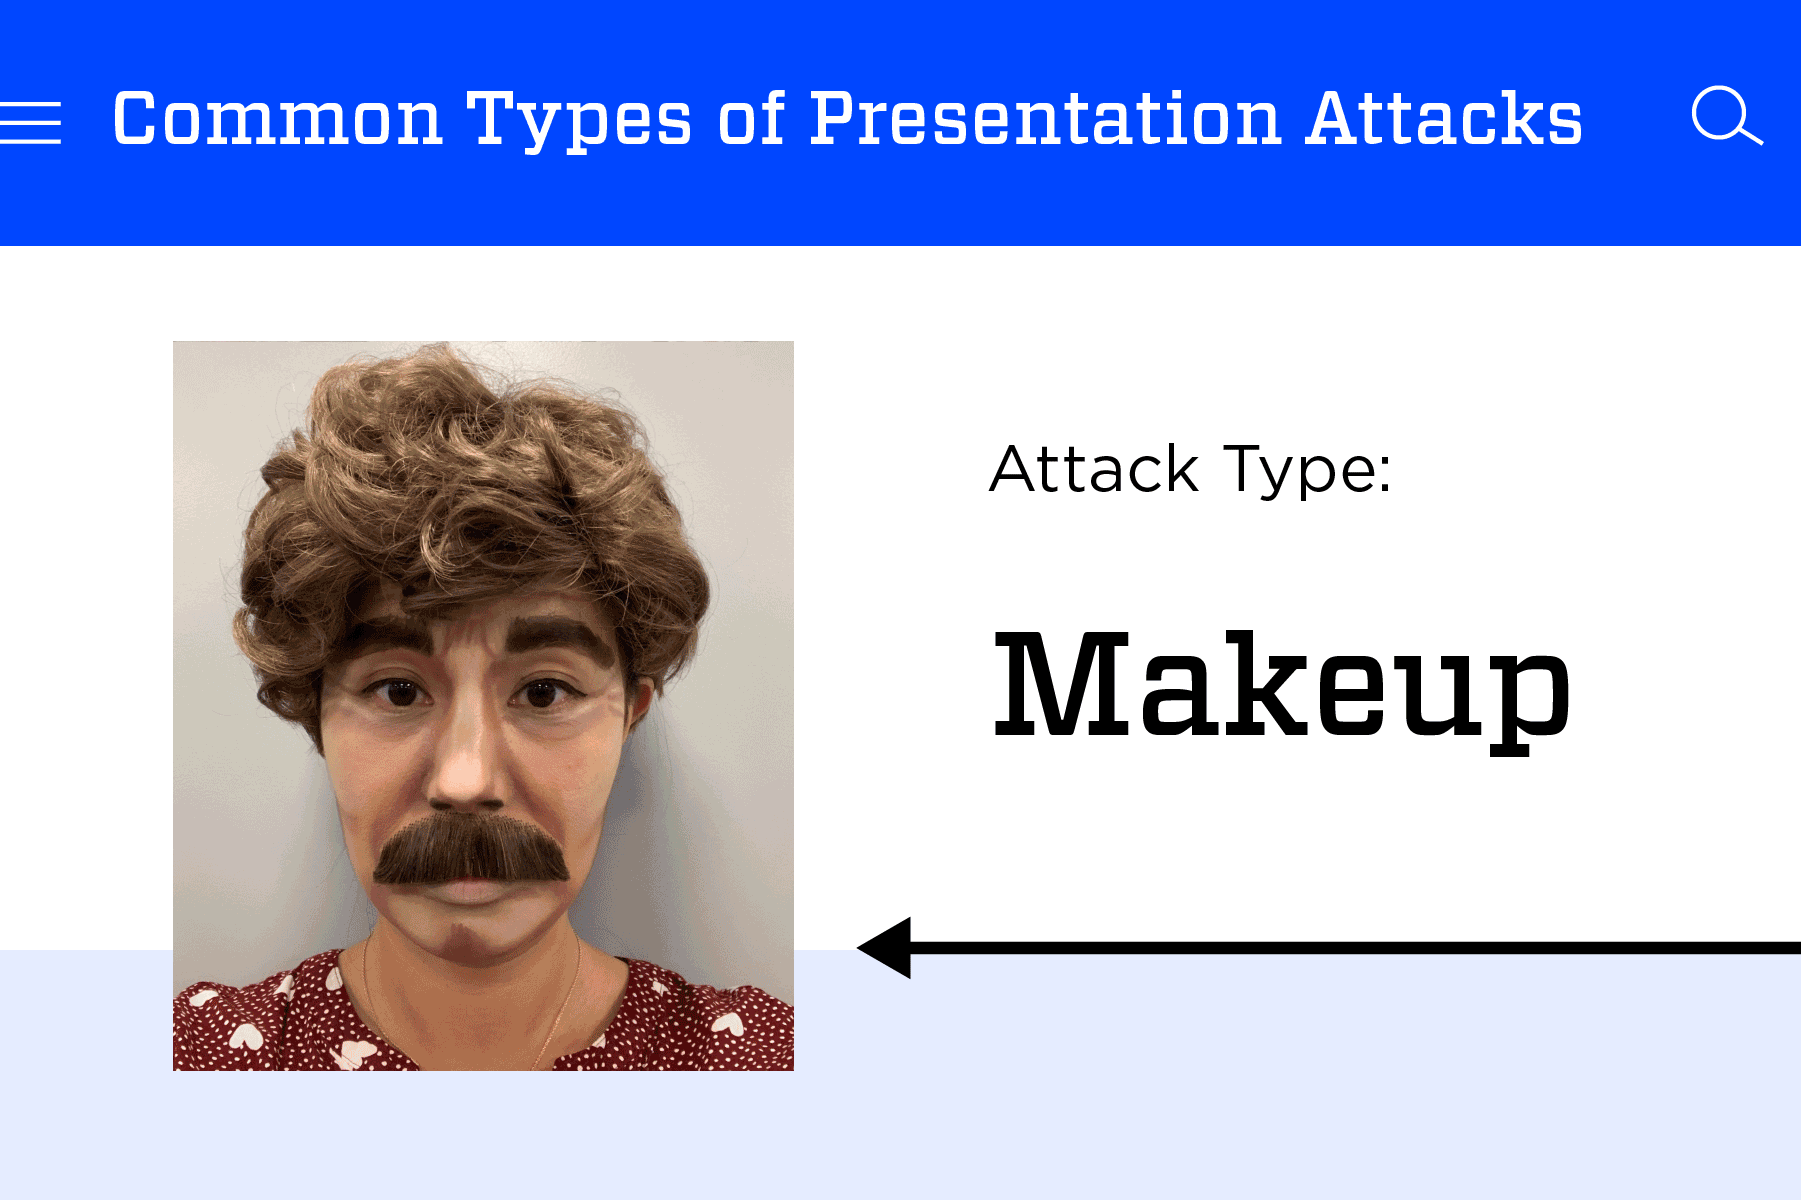 Three rotating images show types of presentation attacks: a person wearing heavy makeup that alters their appearance, a person holding a printed photo of another person, and a hand holding a phone image of another person.